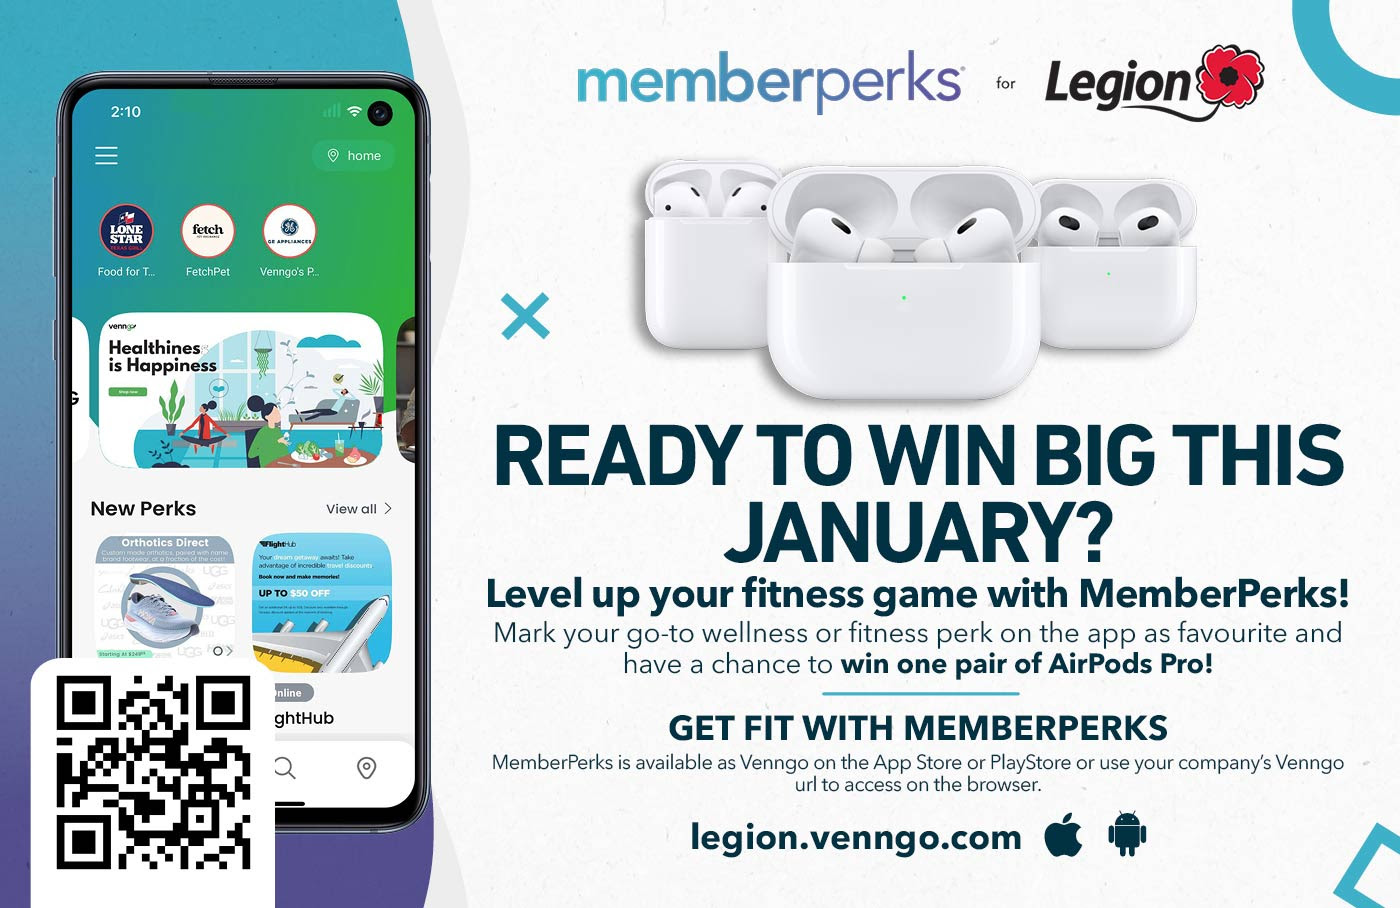 Level up your fitness game with MemberPerks!